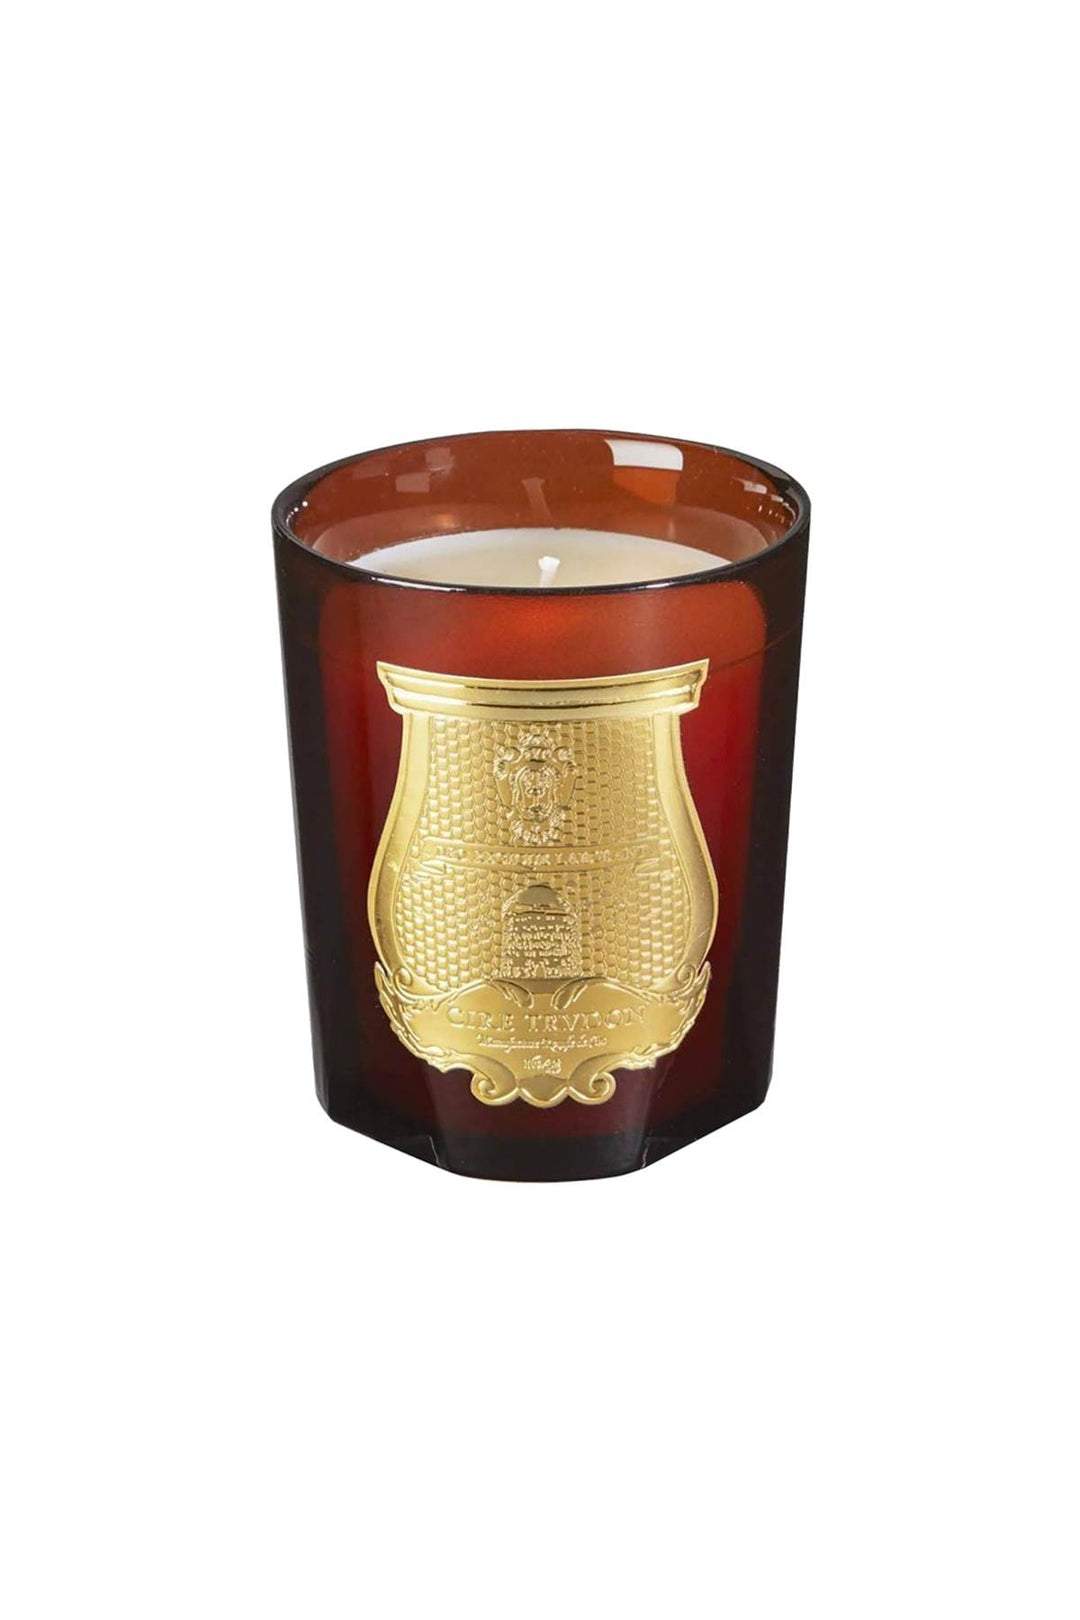 Cire trvdon scented candle cire --0